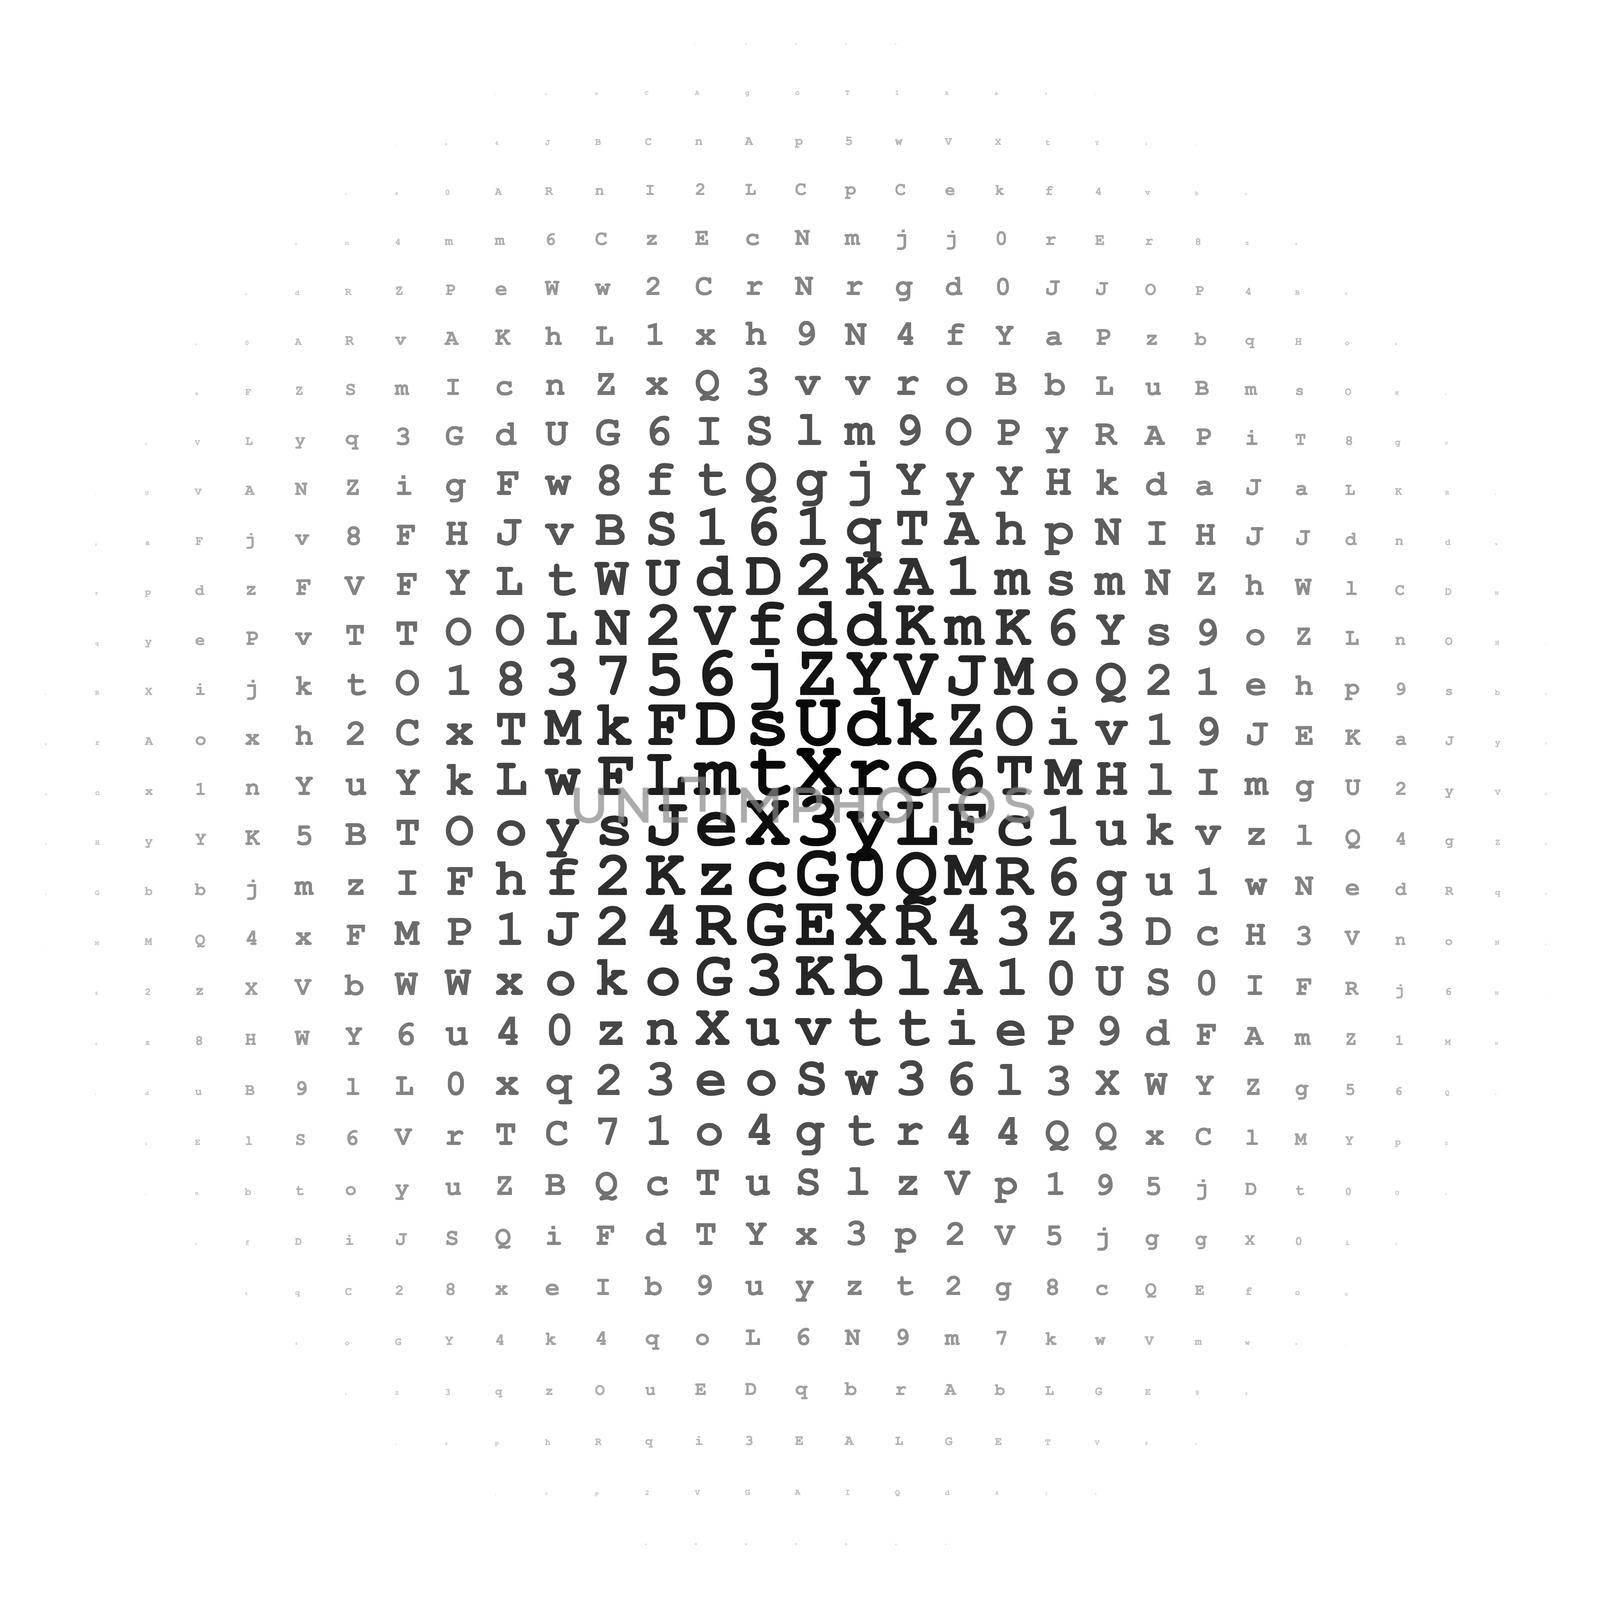 Halftone circle made of black letters and digits on white background illustration